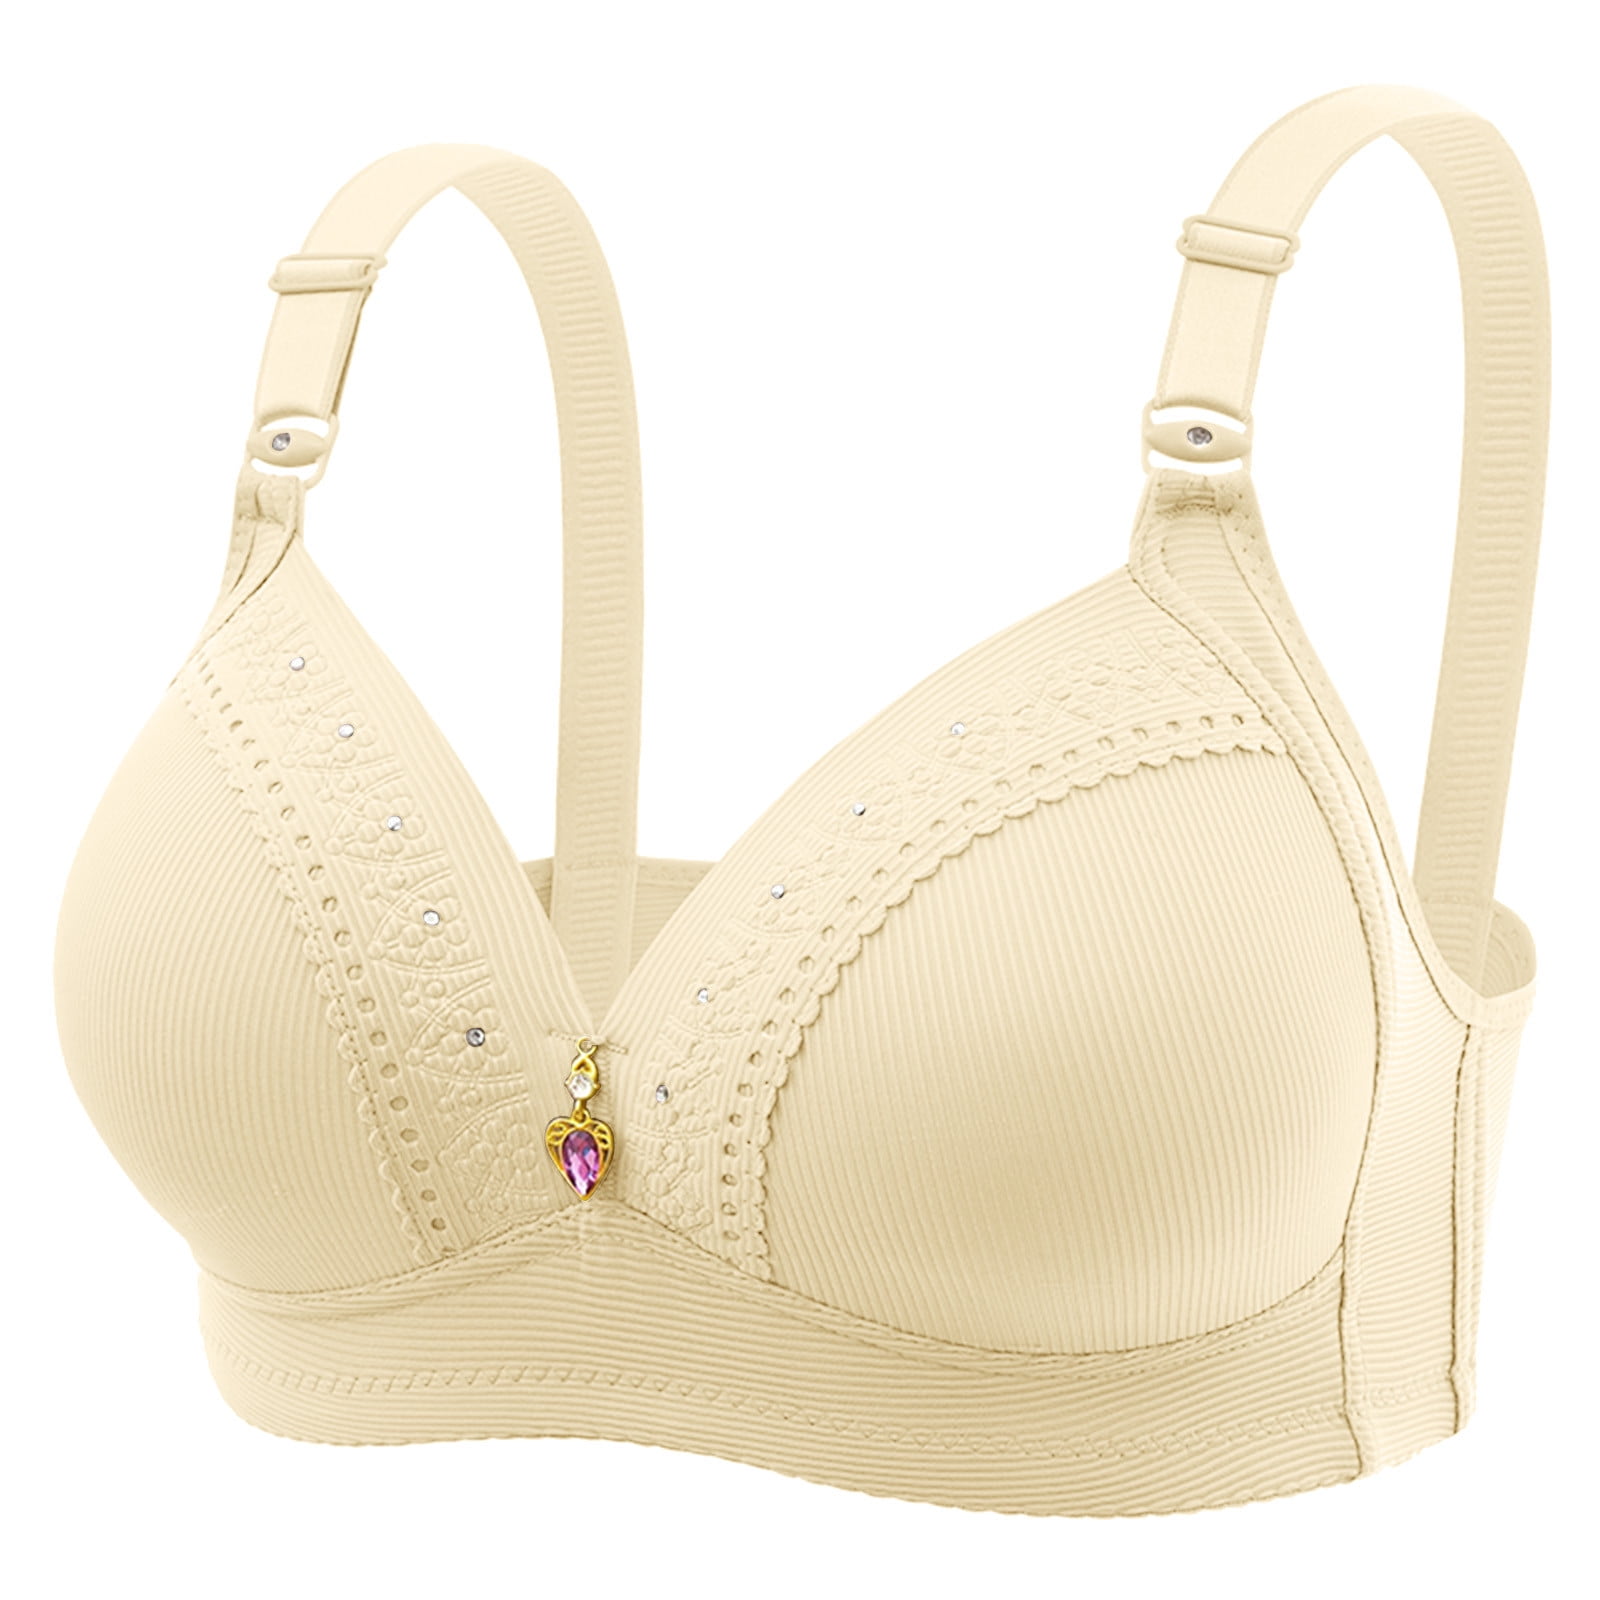 adviicd Minimizer Bras for Women Full Coverage Women's Cushioned